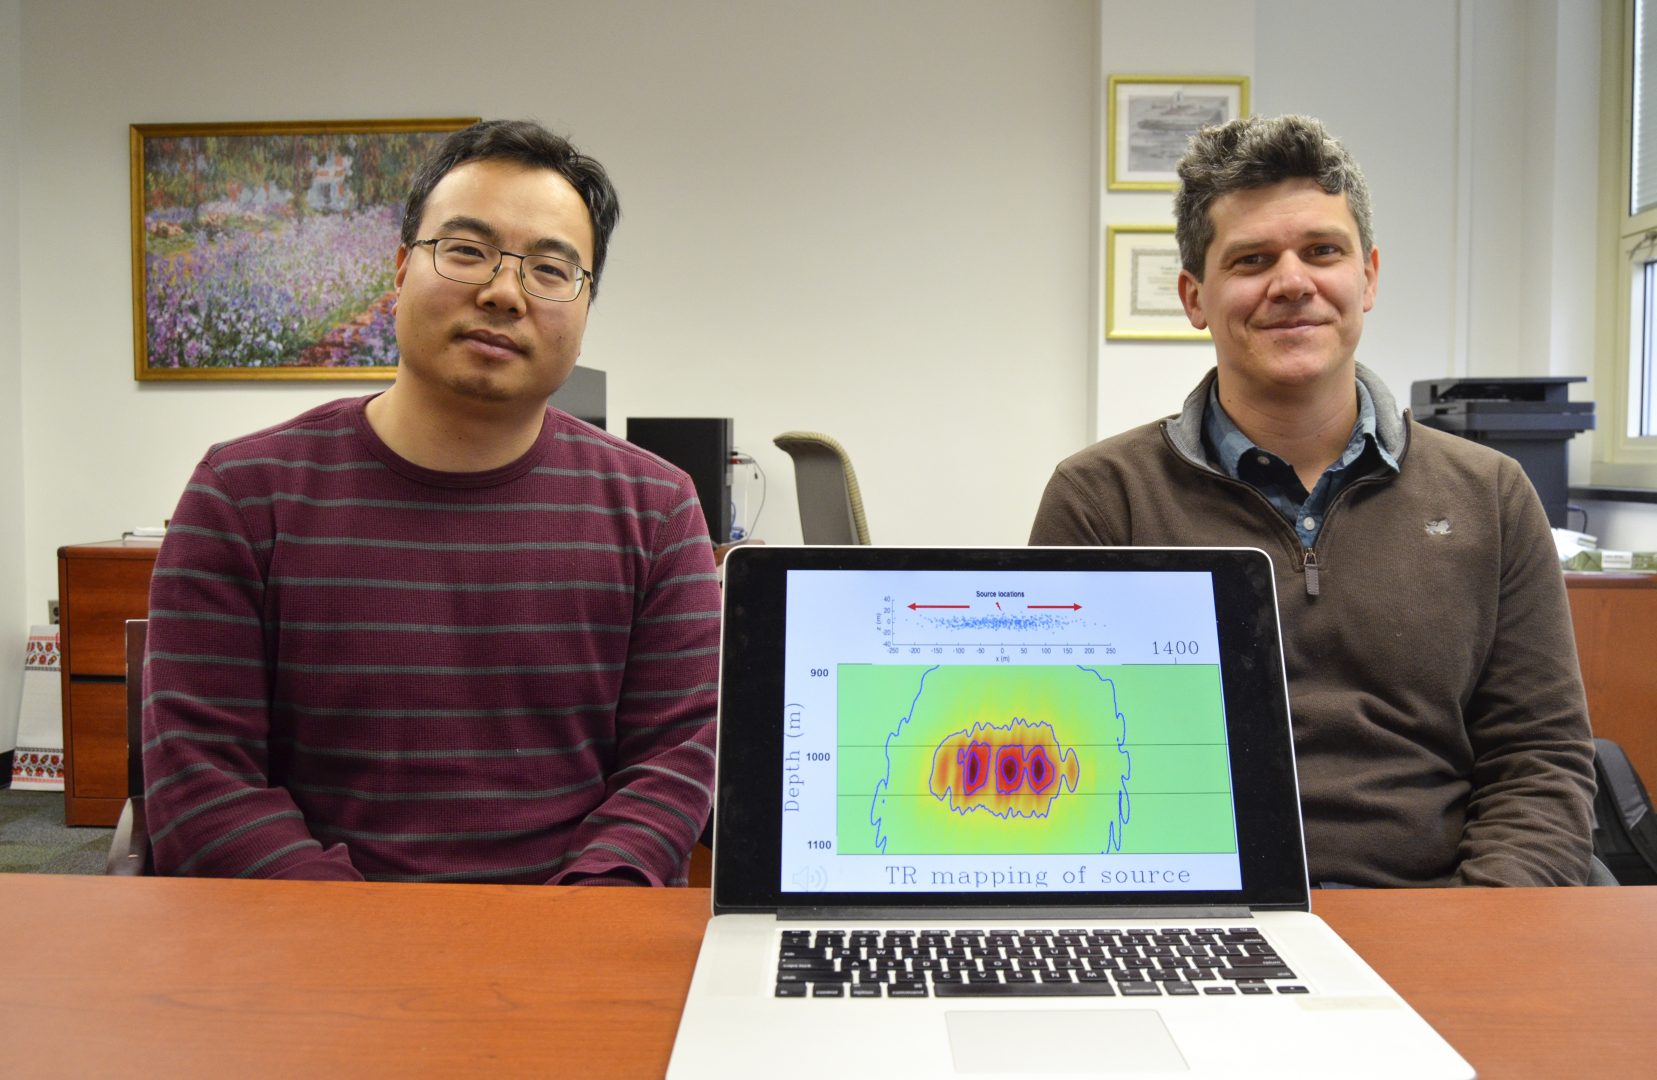 Tieyuan Zhu, left, and Eugene Morgan of Pennsylvania State University are part of a research team studying carbon storage. They are pictured here with a model that helps explain how carbon dioxide moves through rock underground.